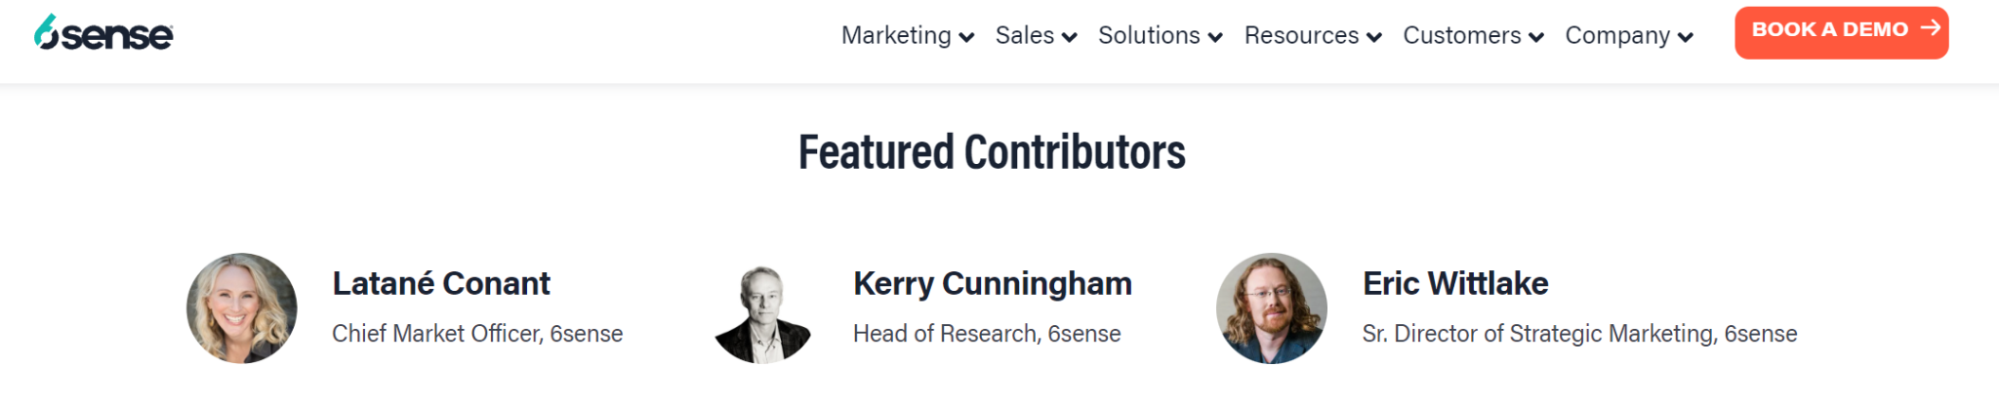 The resources page shows the 3 featured thought leaders who contribute to 6Sense's organic content.